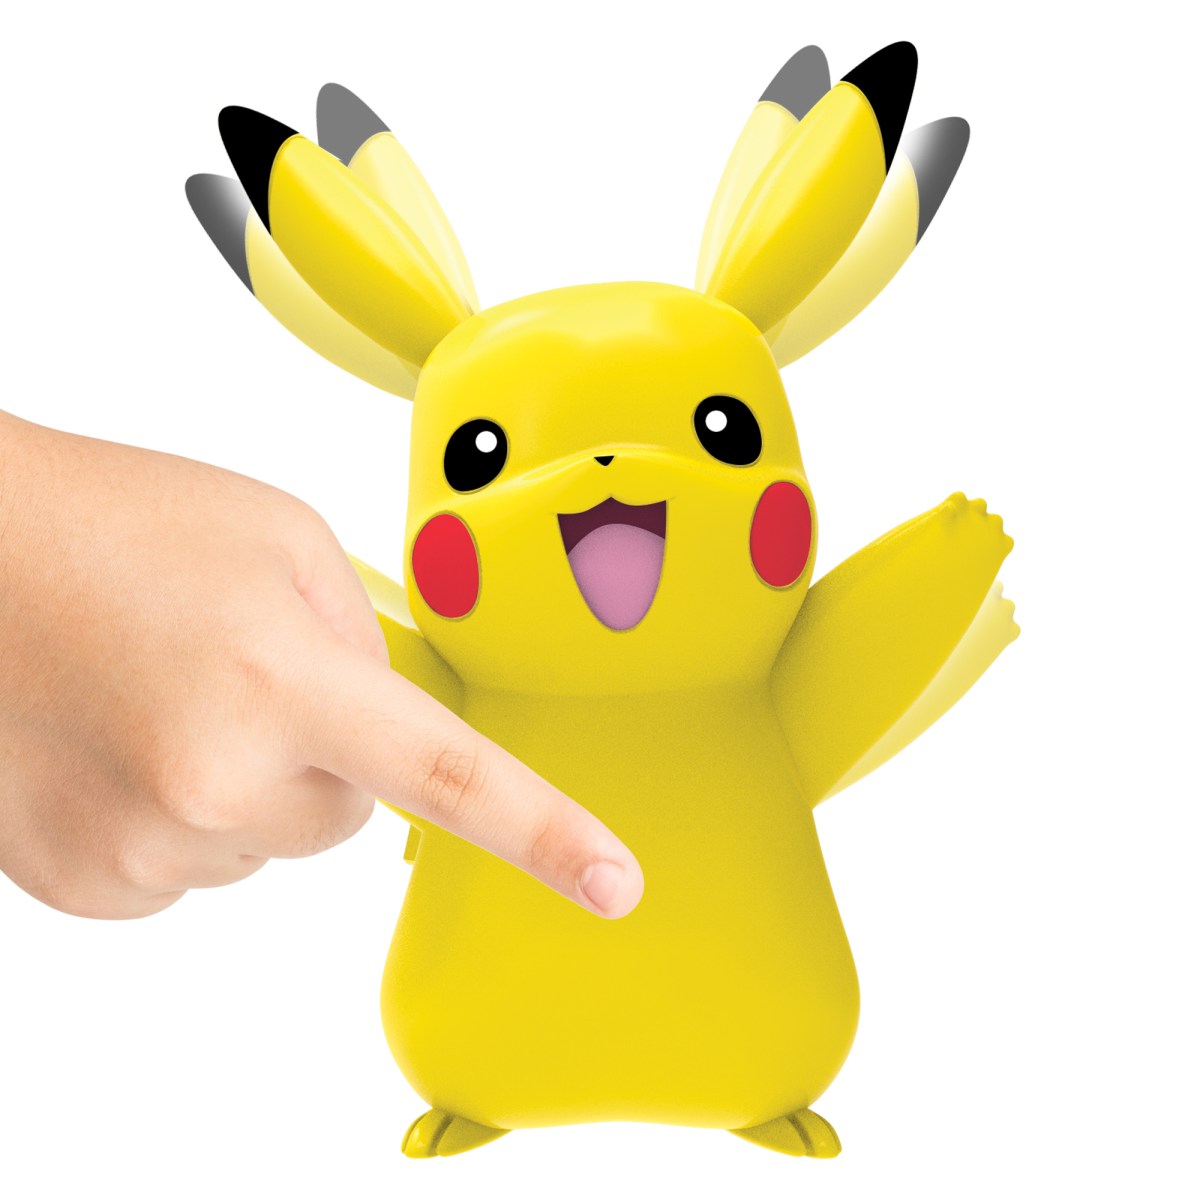 Image of Pikachu in action